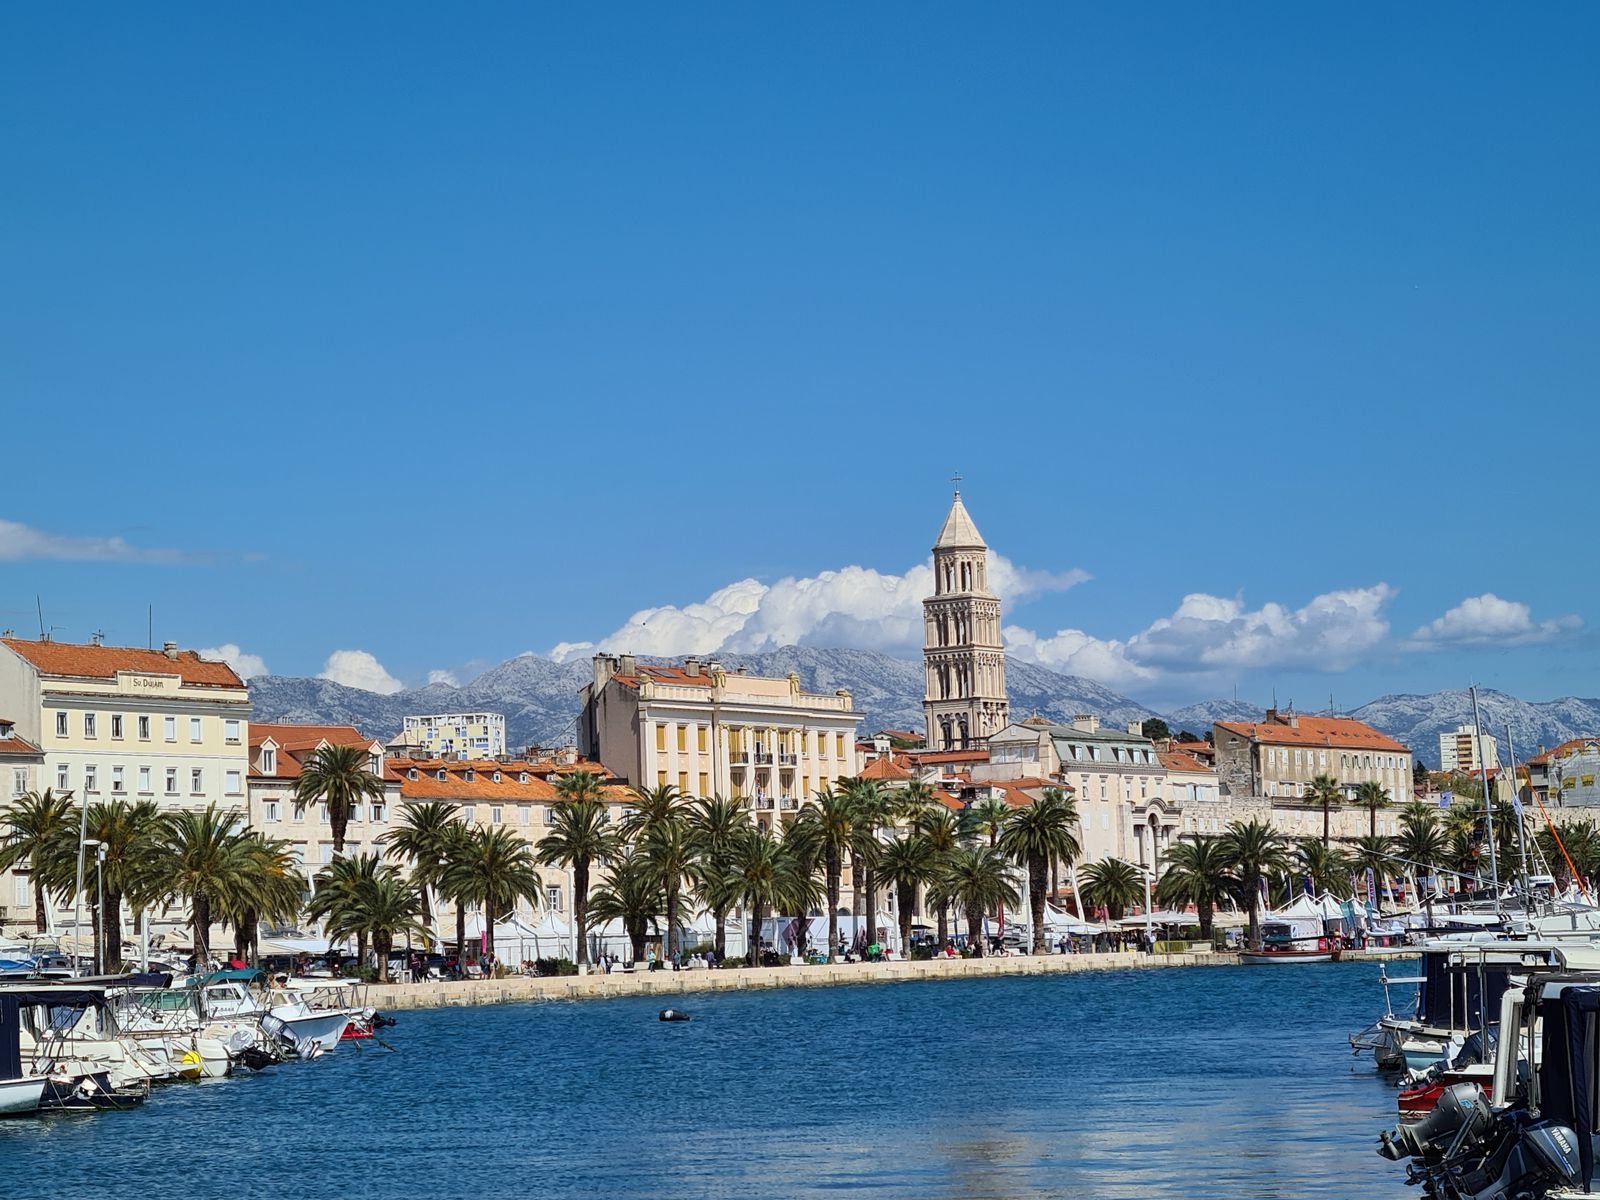 skyline of Split Croatia old town with orange rooftops and the bell tower dominating. Sky is blue and the view is looking across water where boats are docked